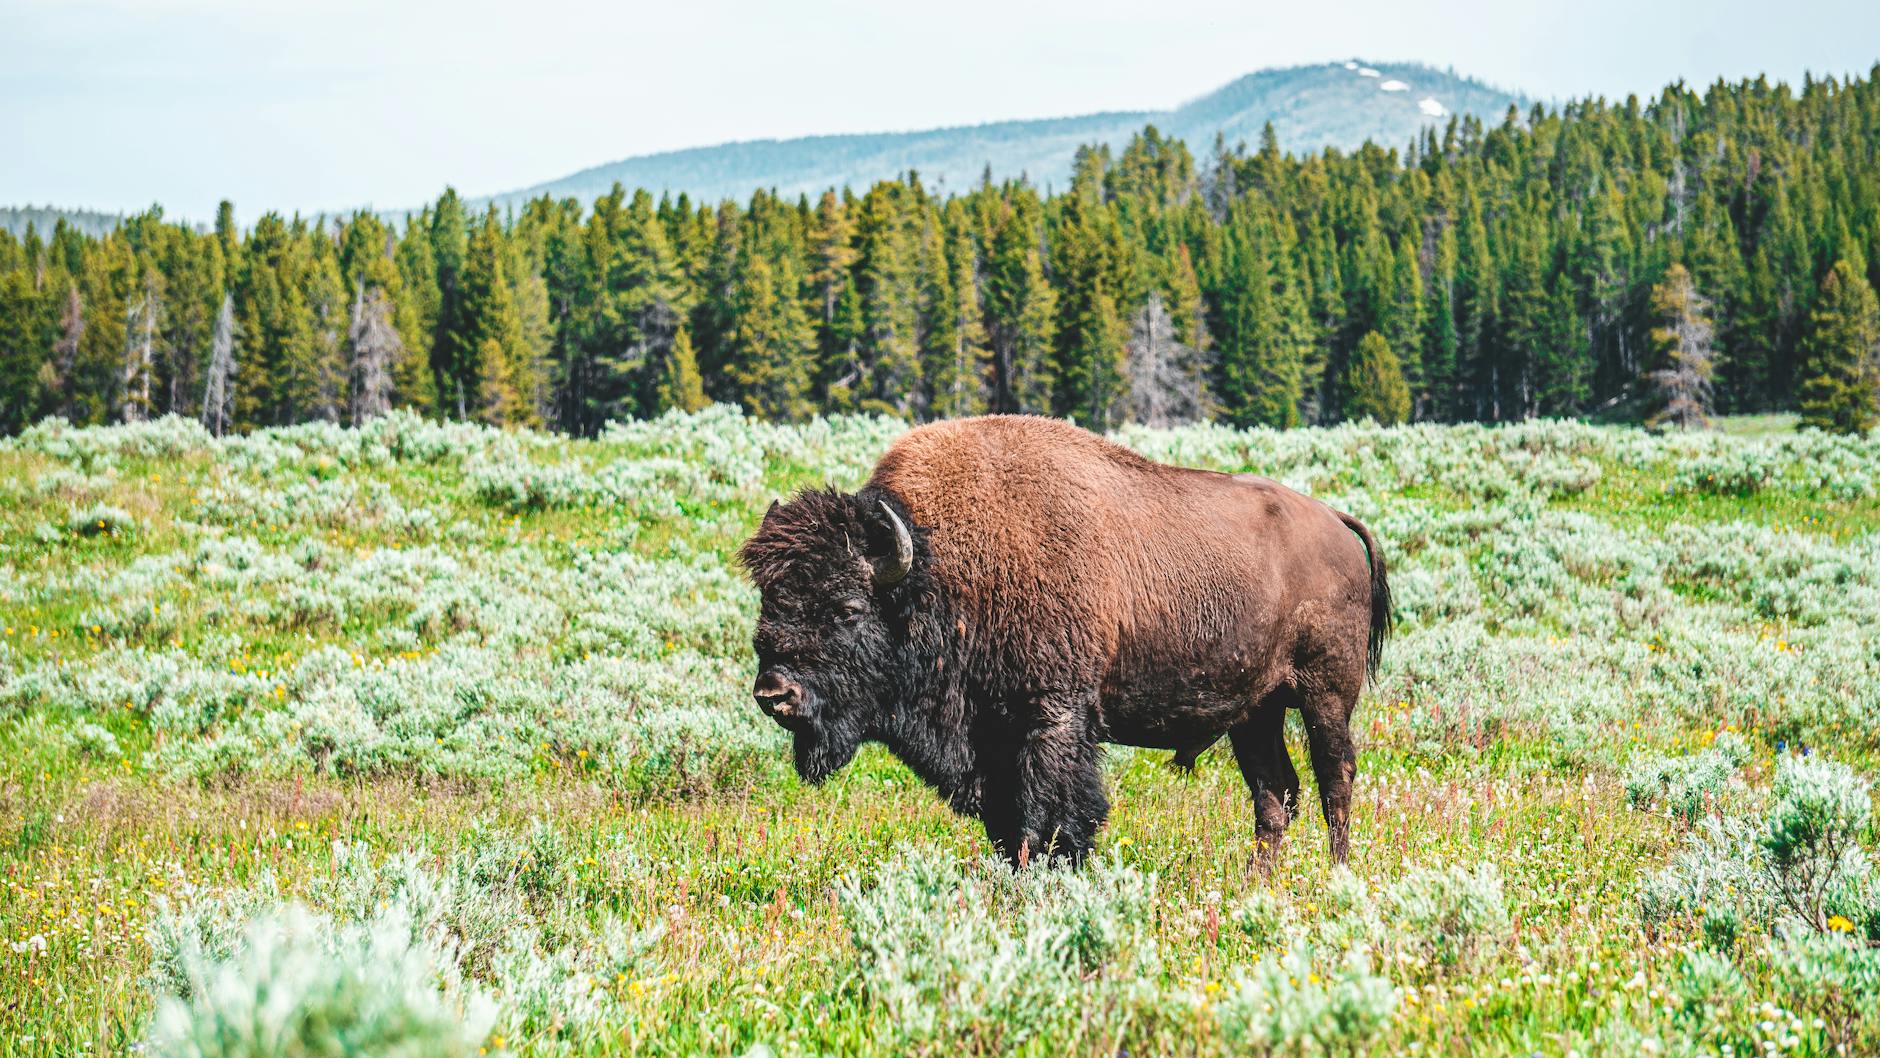 Meet the American Bison